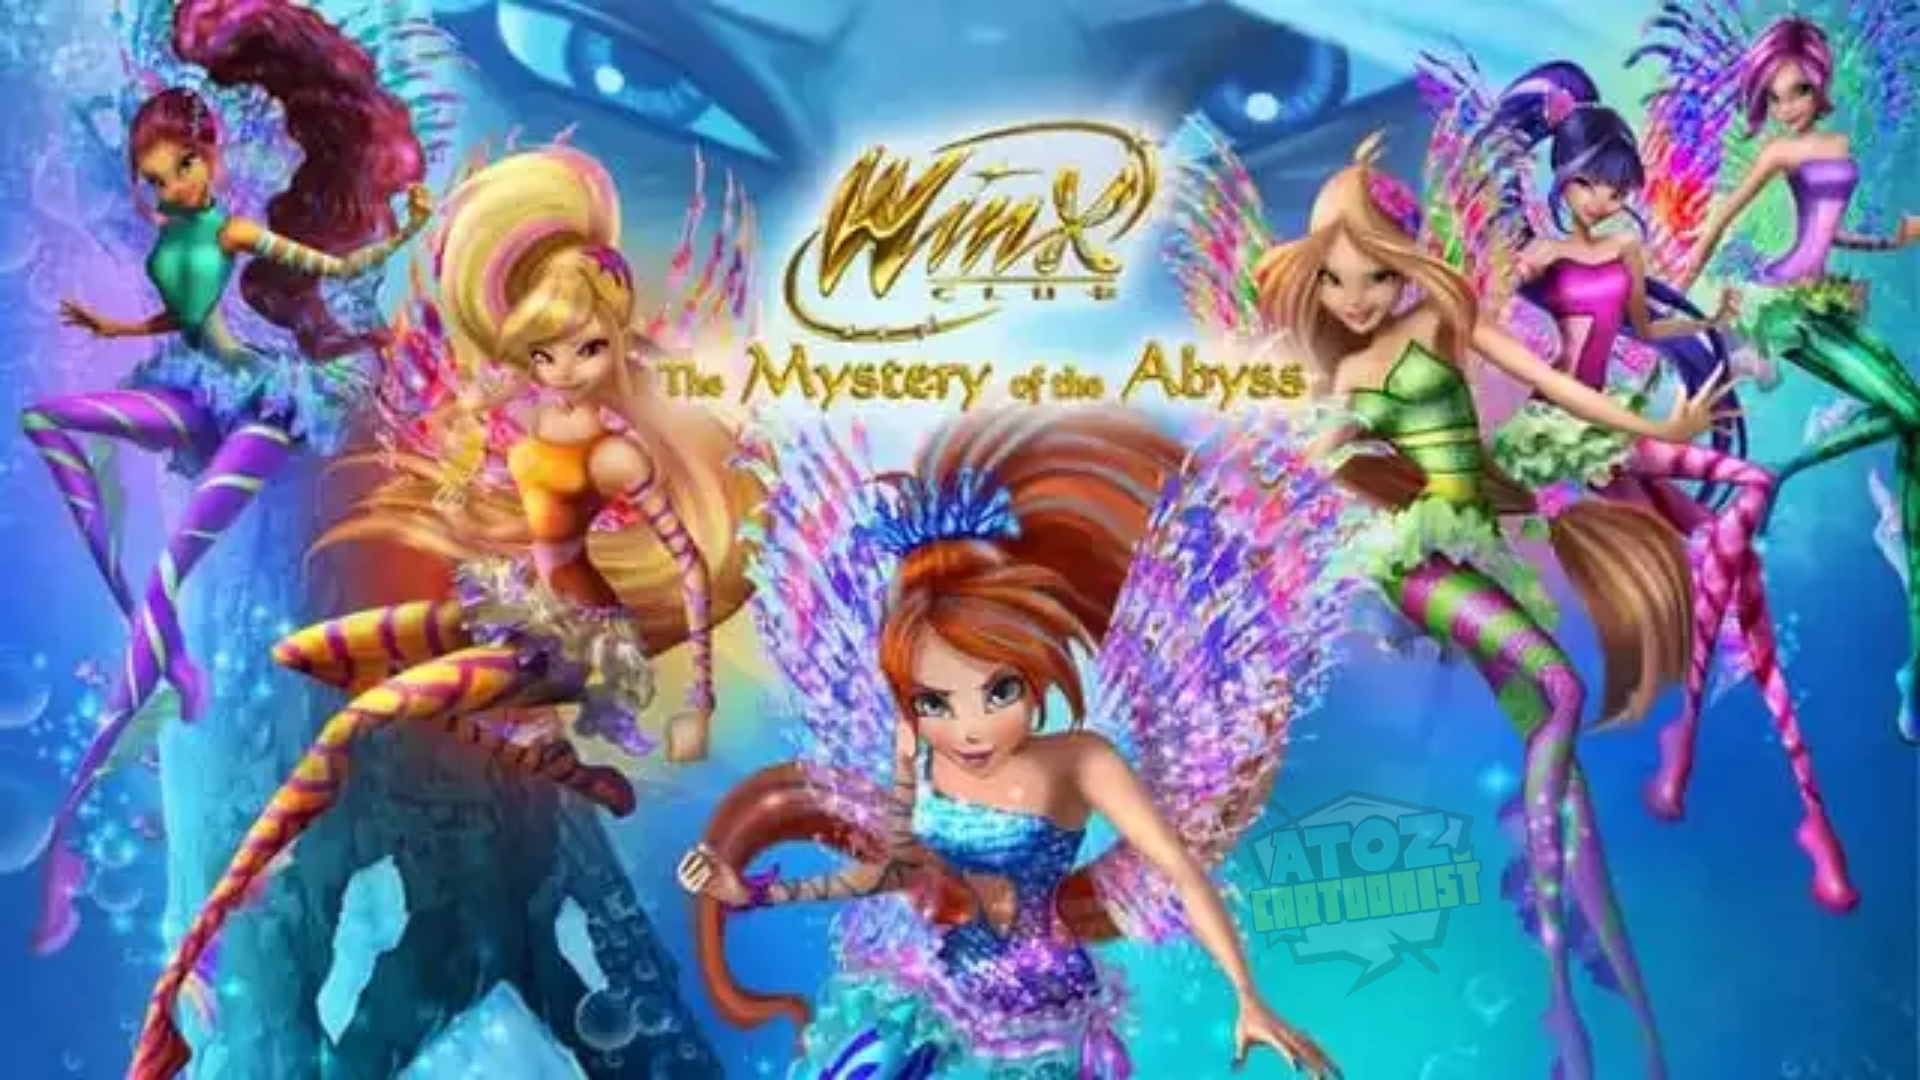 Winx Club: The Mystery of the Abyss (2014) Multi Audio Download 480p SDTV WEB-DL